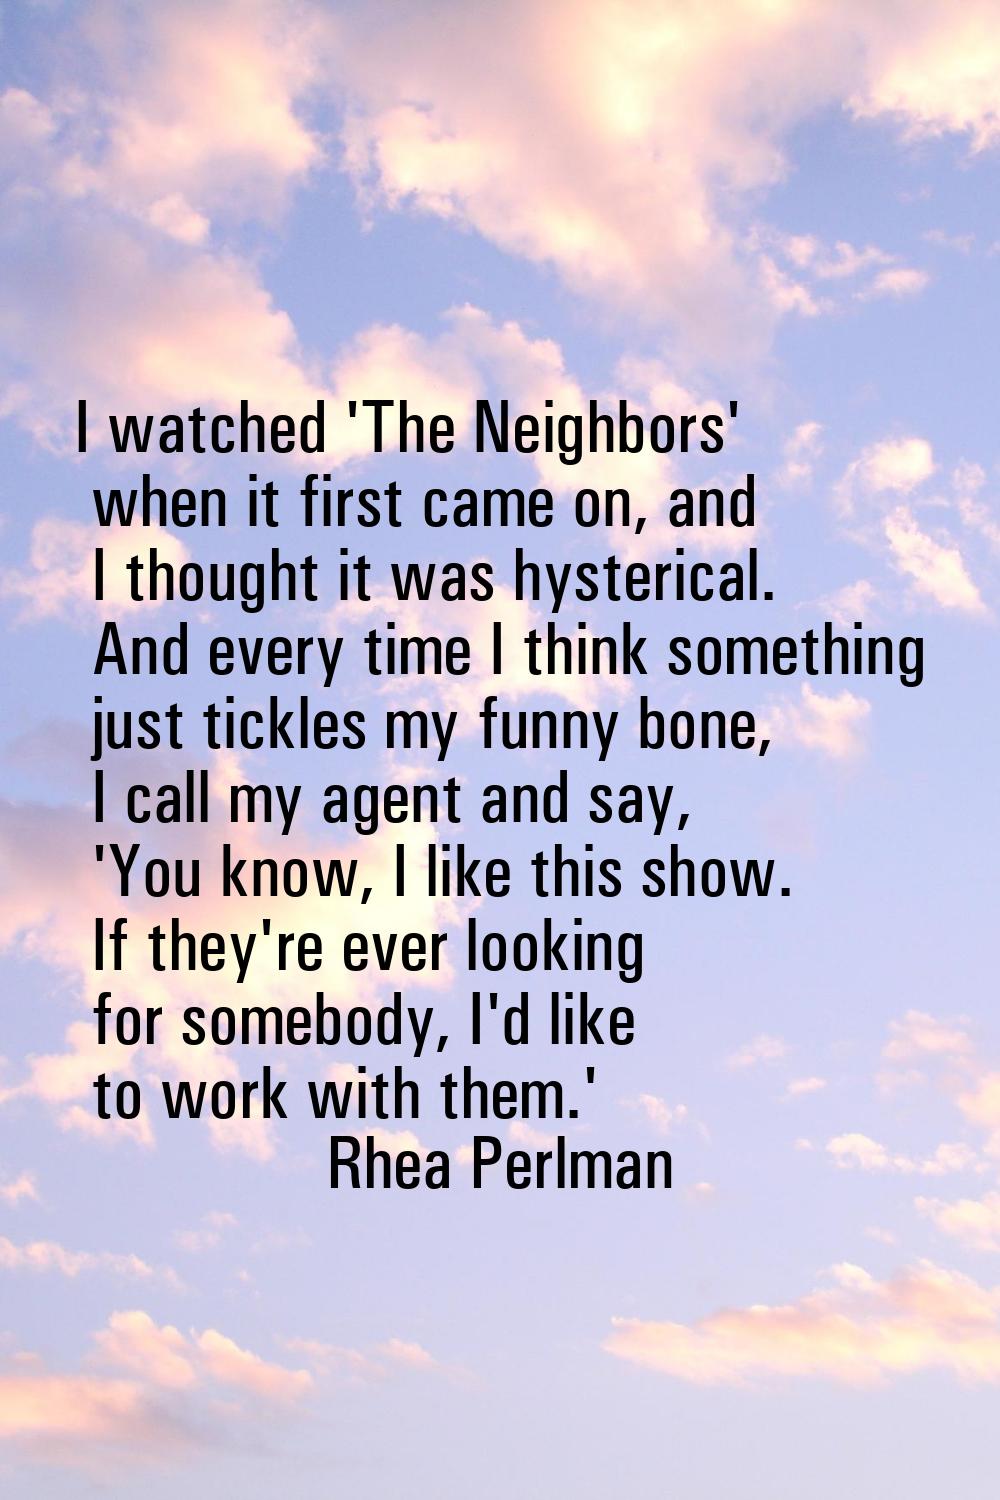 I watched 'The Neighbors' when it first came on, and I thought it was hysterical. And every time I 